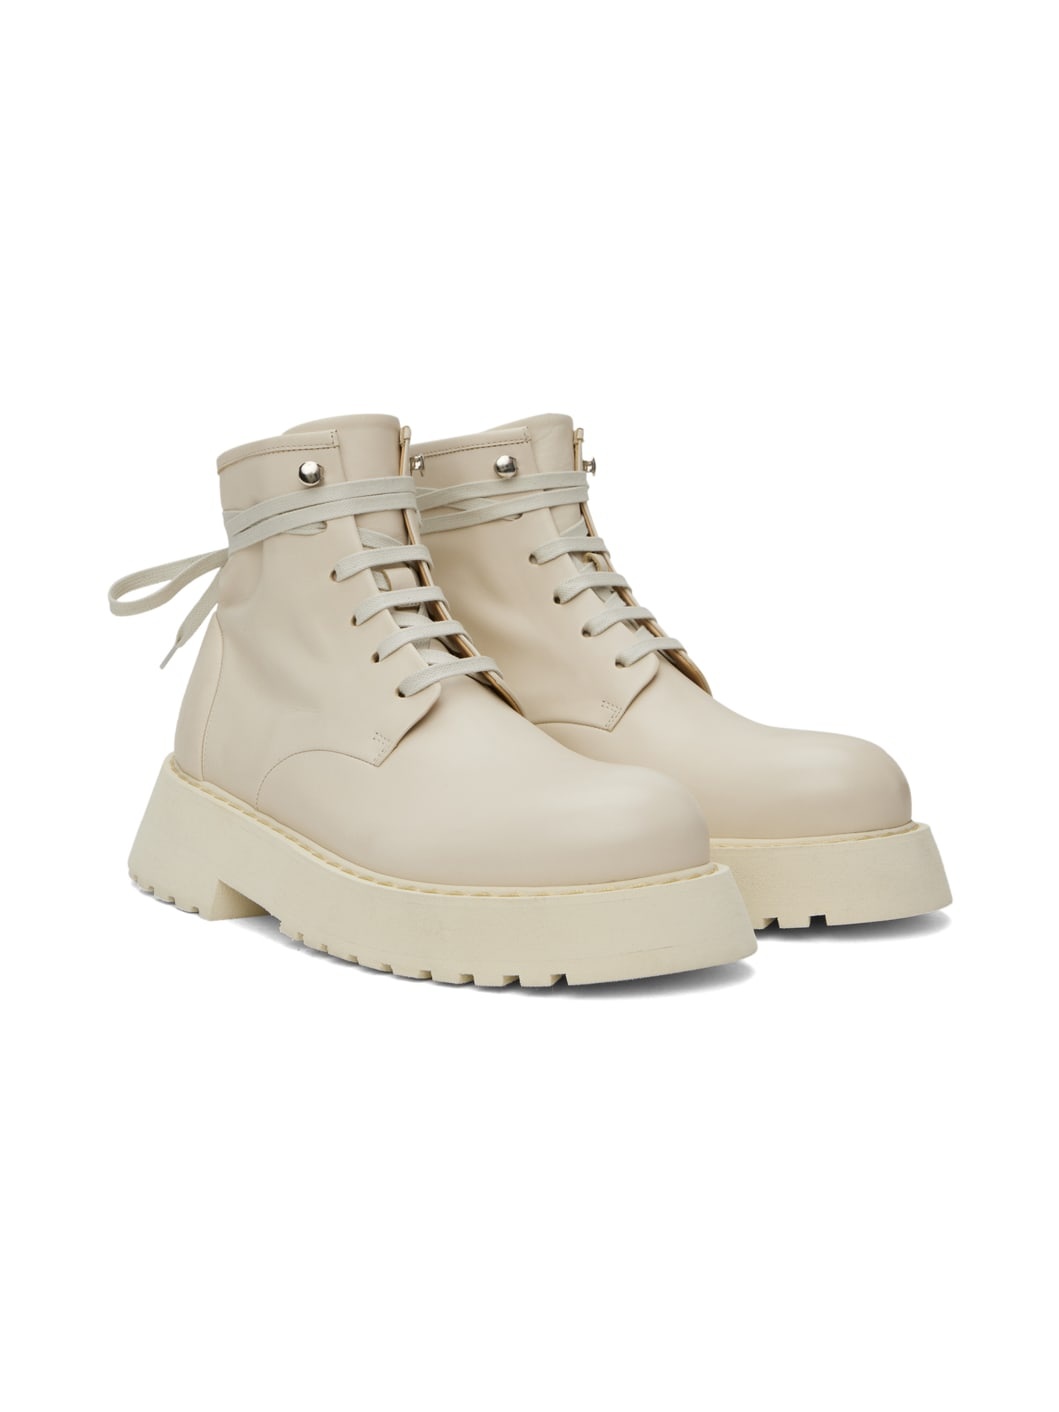 Off-White Micarro Lace-Up Ankle Boots - 4